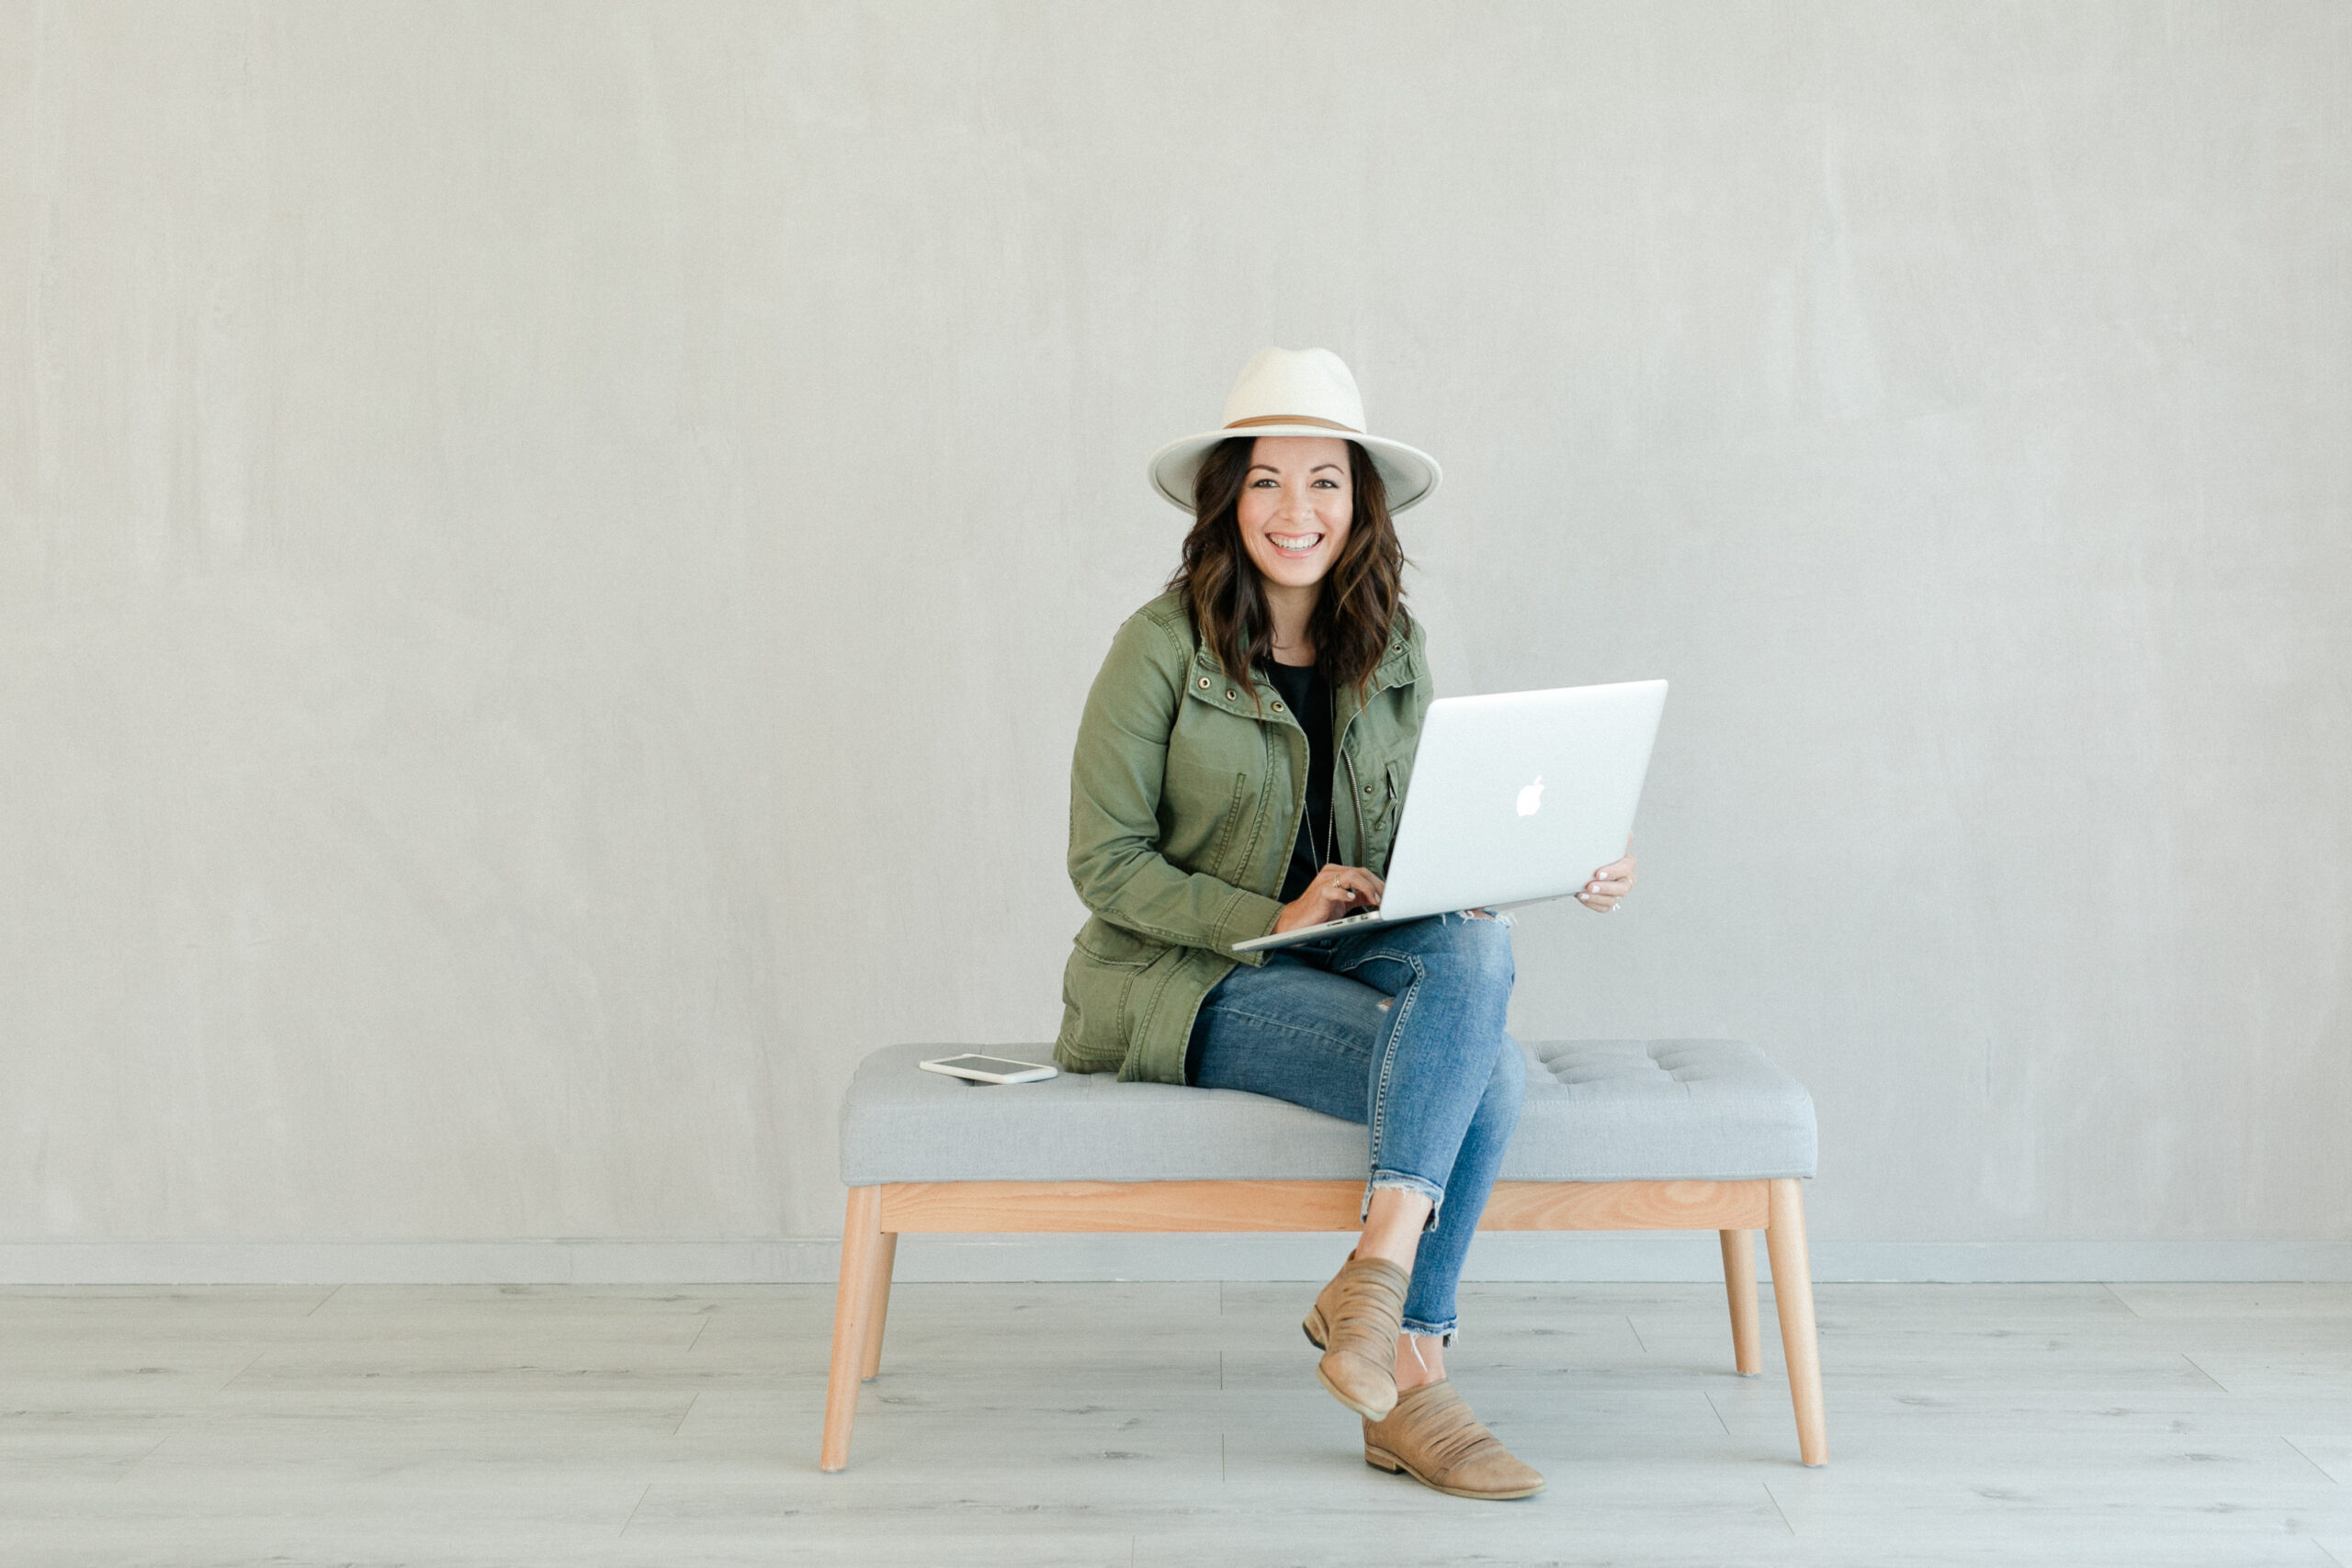 Best Amazon Prime Day photography deals of 2023 by Kate Noelle Photography: Kate sits on a bench with her white laptop and smiles. She is wearing jeans, a navy jacket, and a white wide-brimmed hat.